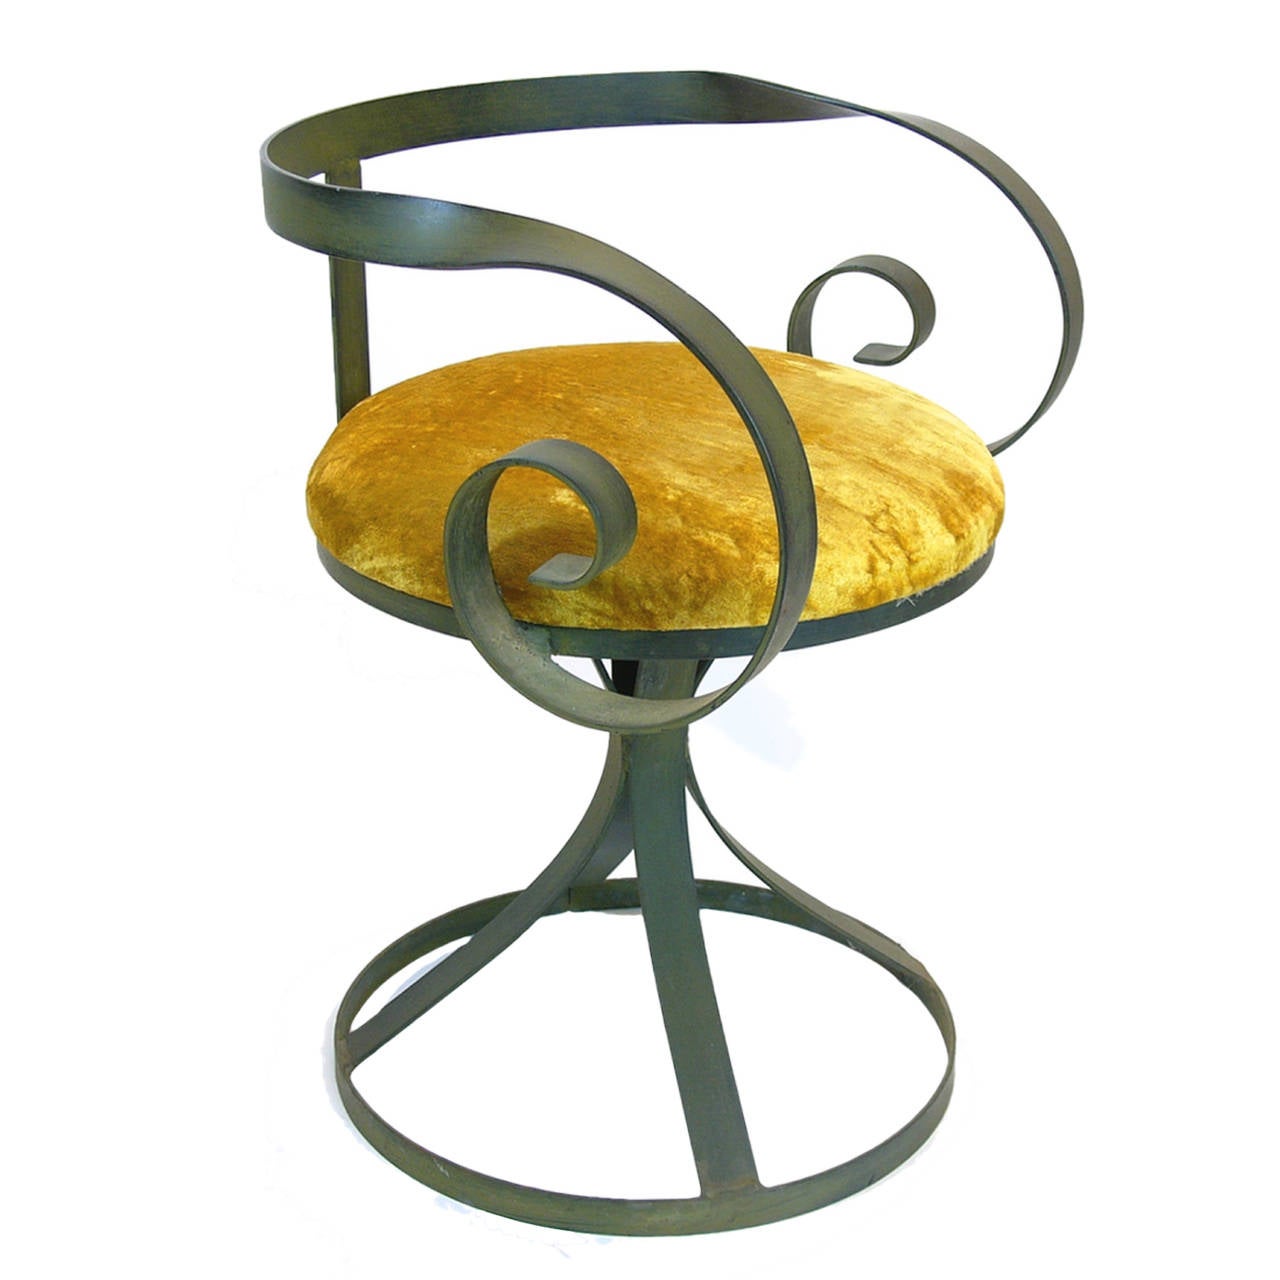 Very unique and heavy wrought iron swivel chairs with citrine yellow seat